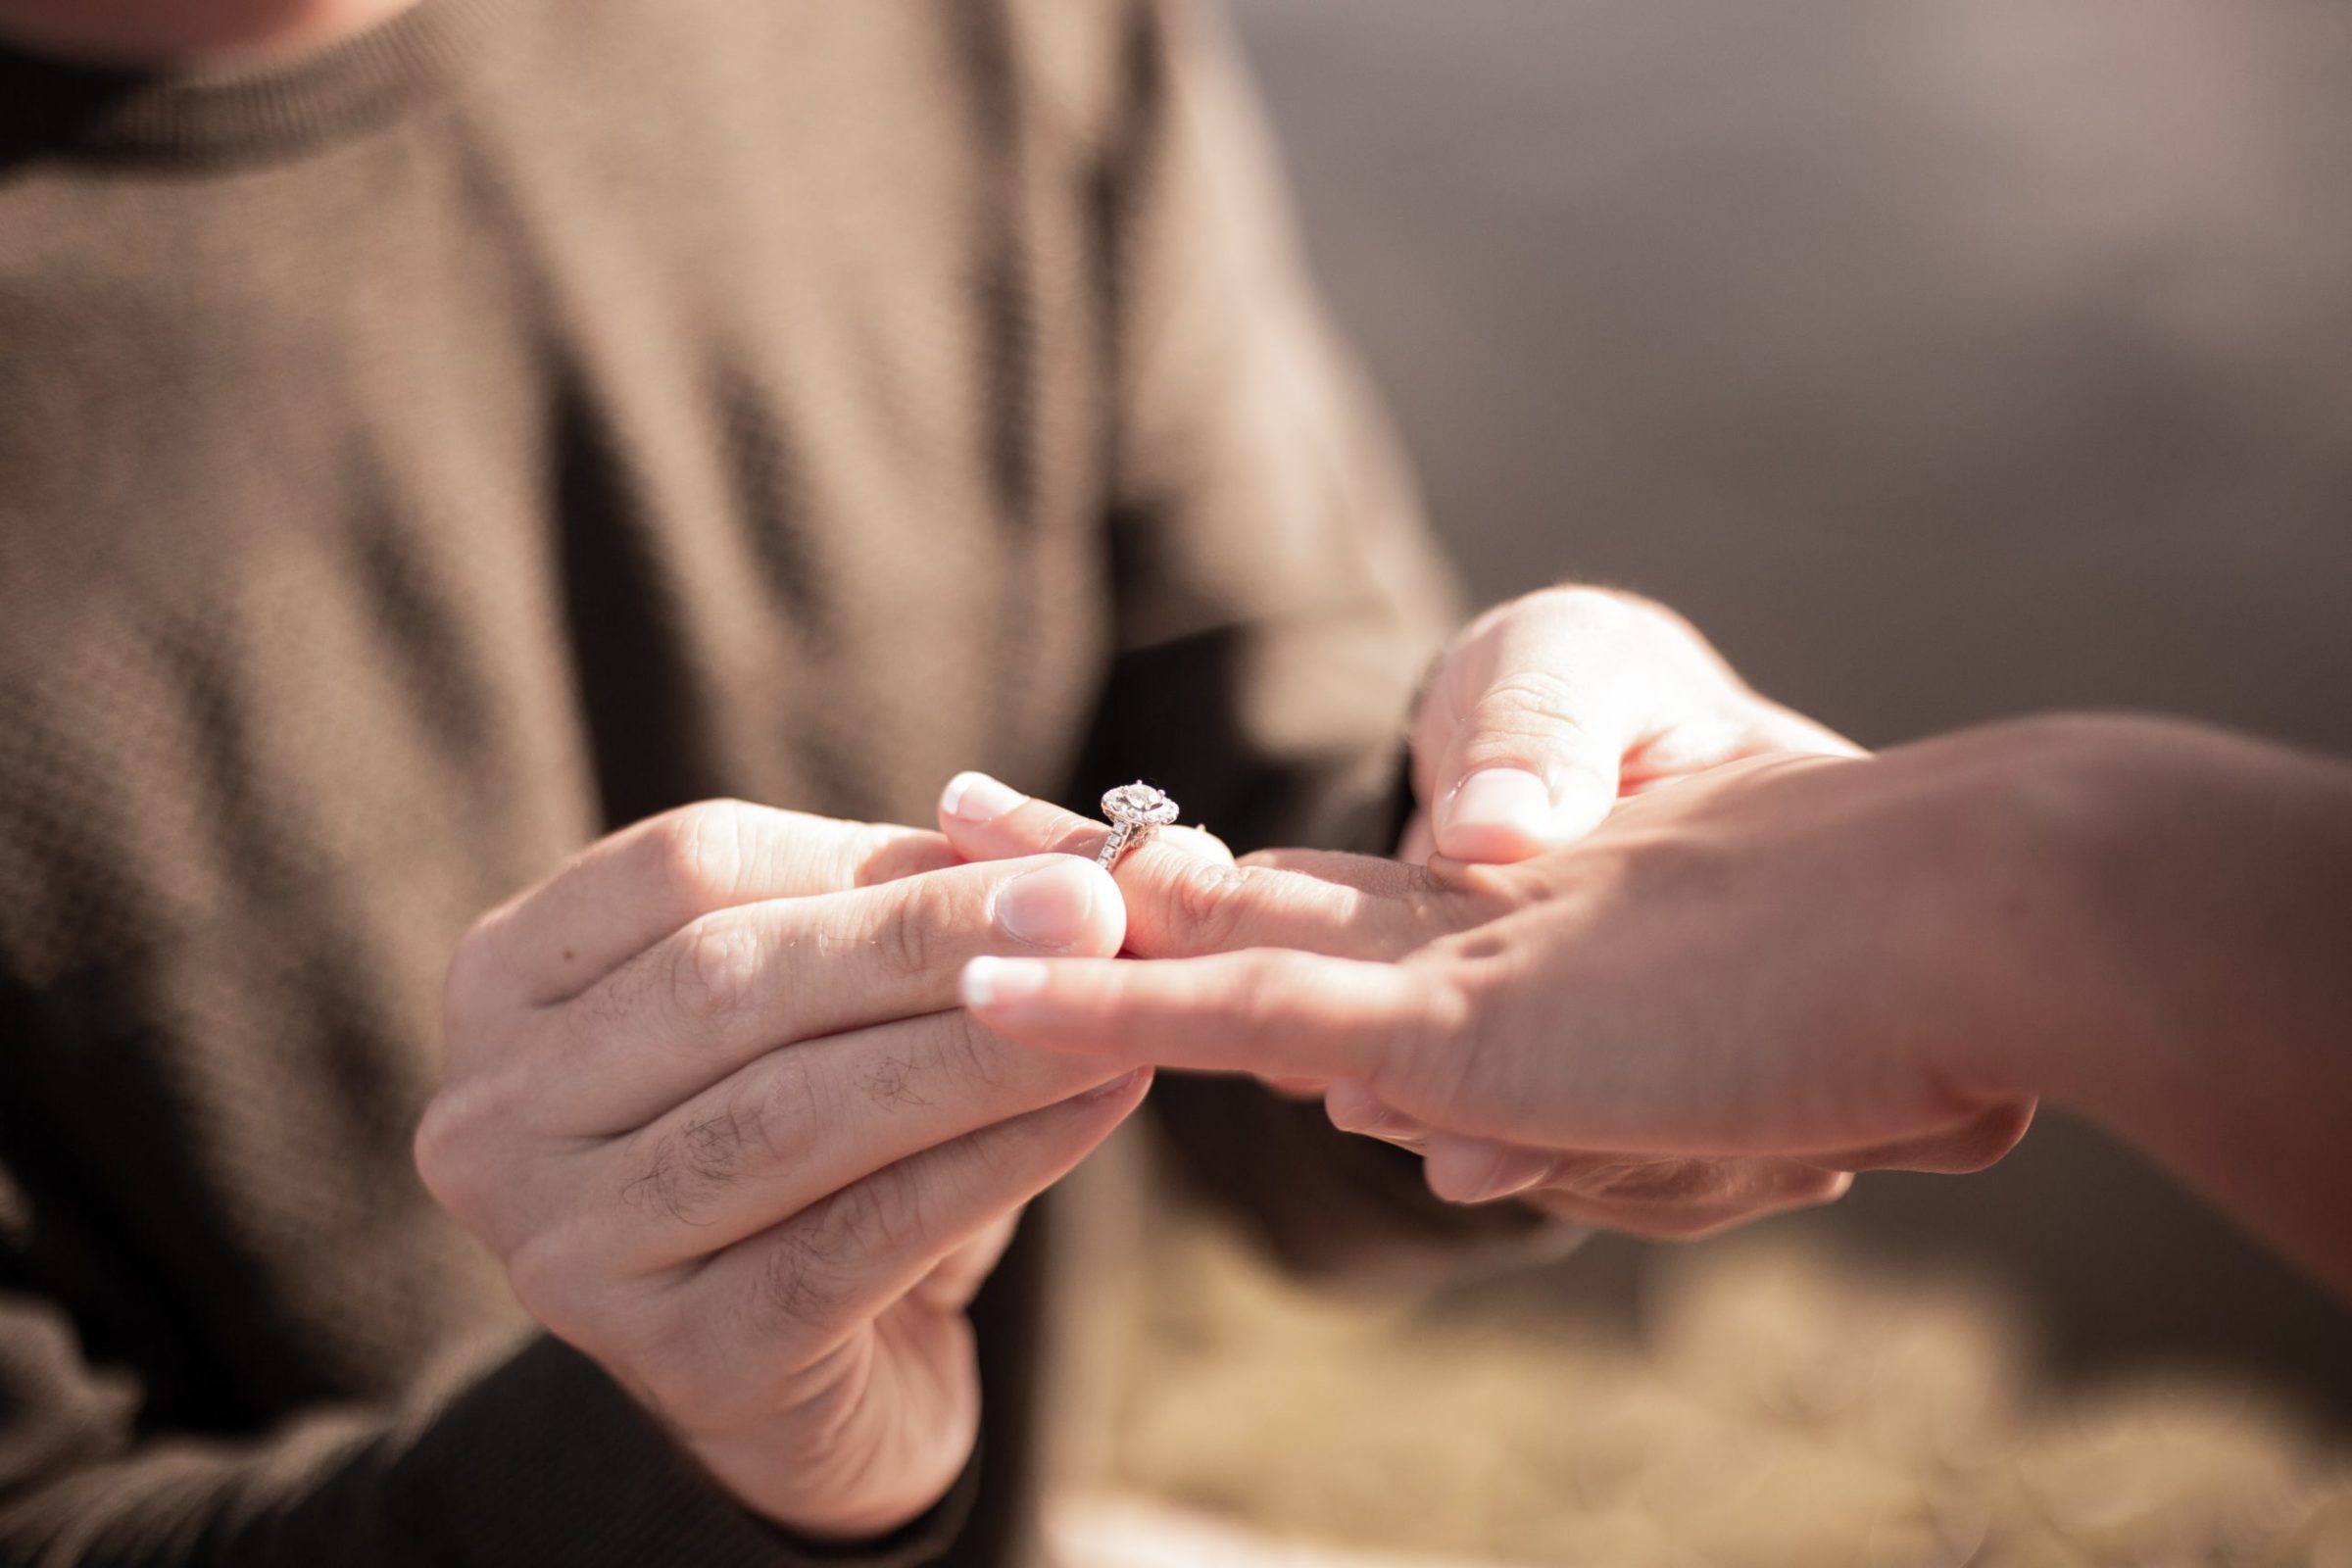 Thinking About Proposing? 3 Things to Consider Before Popping the Question